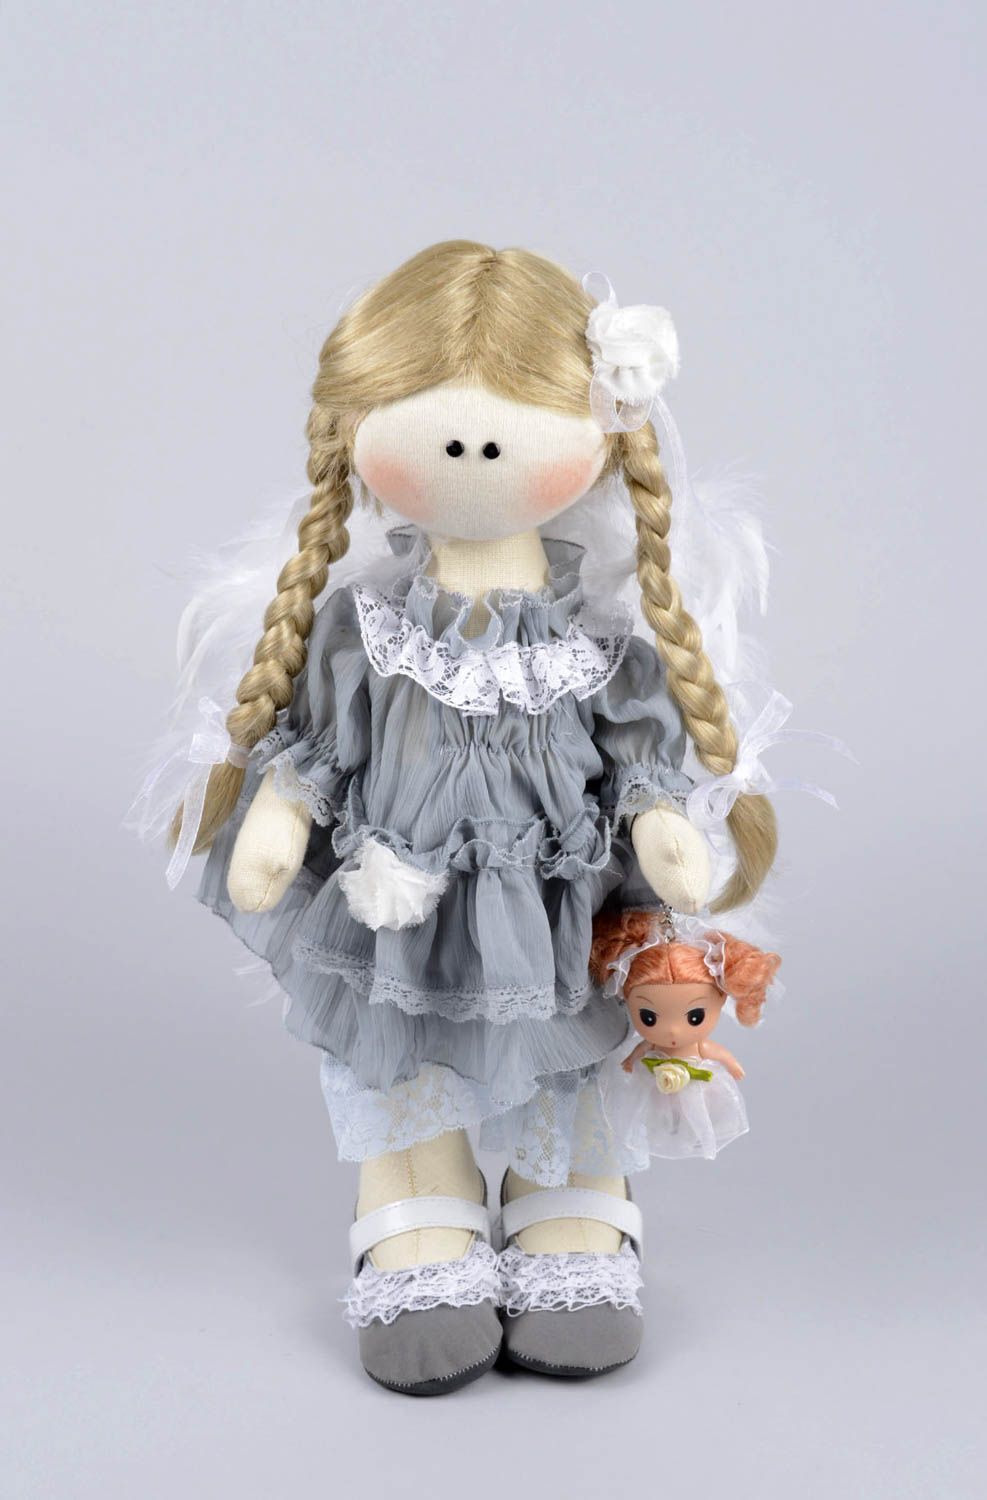 Handmade soft toy girl doll collectible dolls best gifts for girls stuffed toy photo 1